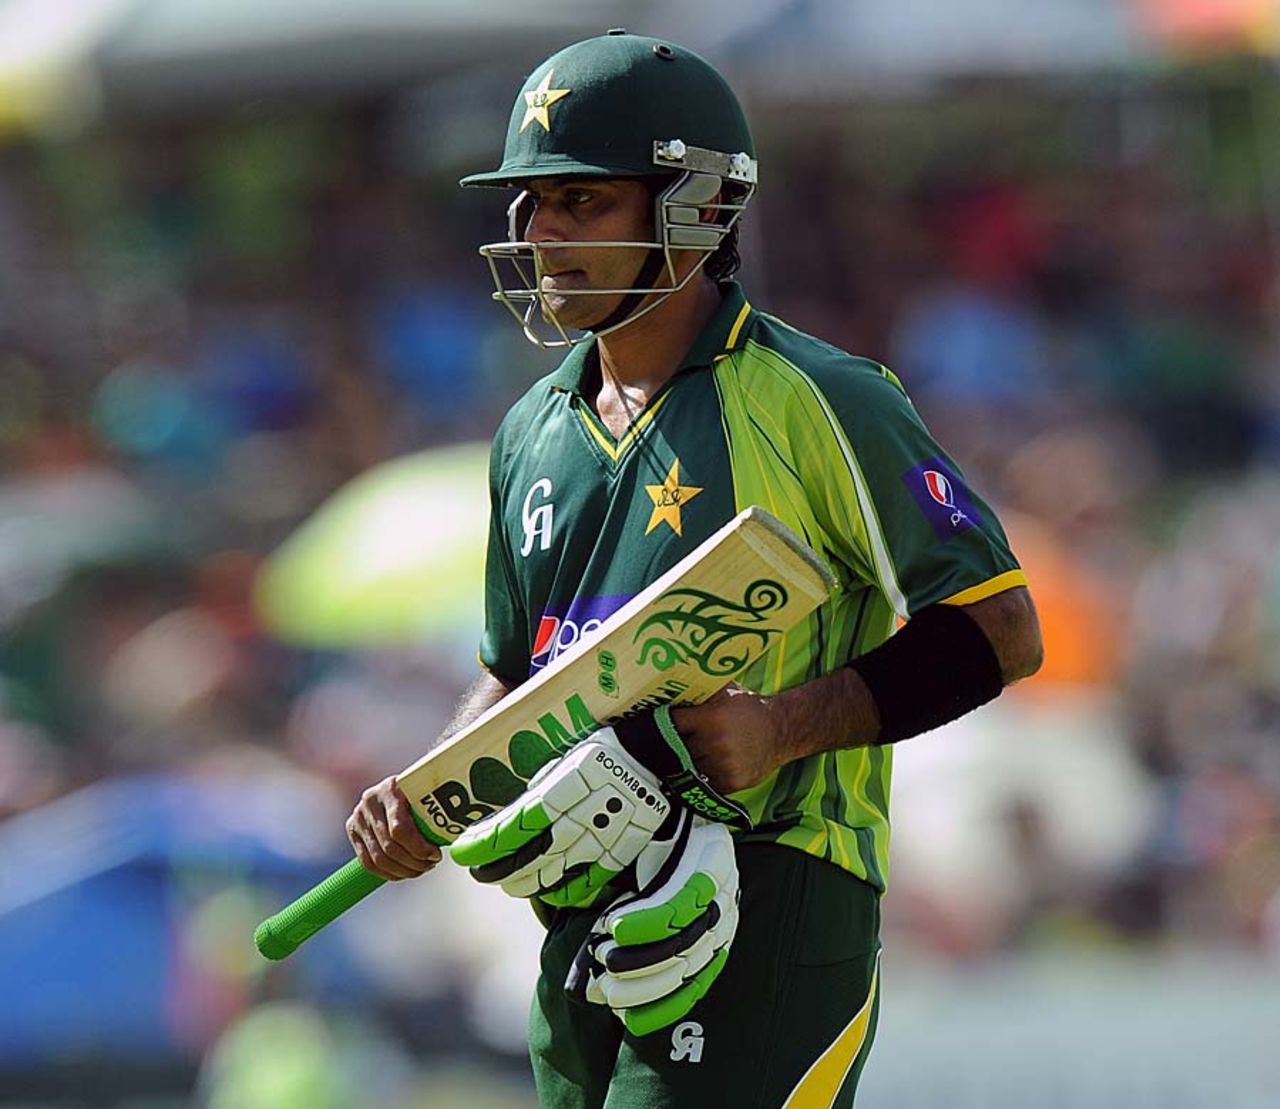 Mohammad Hafeez leaves the field after being run out, South Africa v Pakistan, 1st ODI, Bloemfontein, March 10, 2013